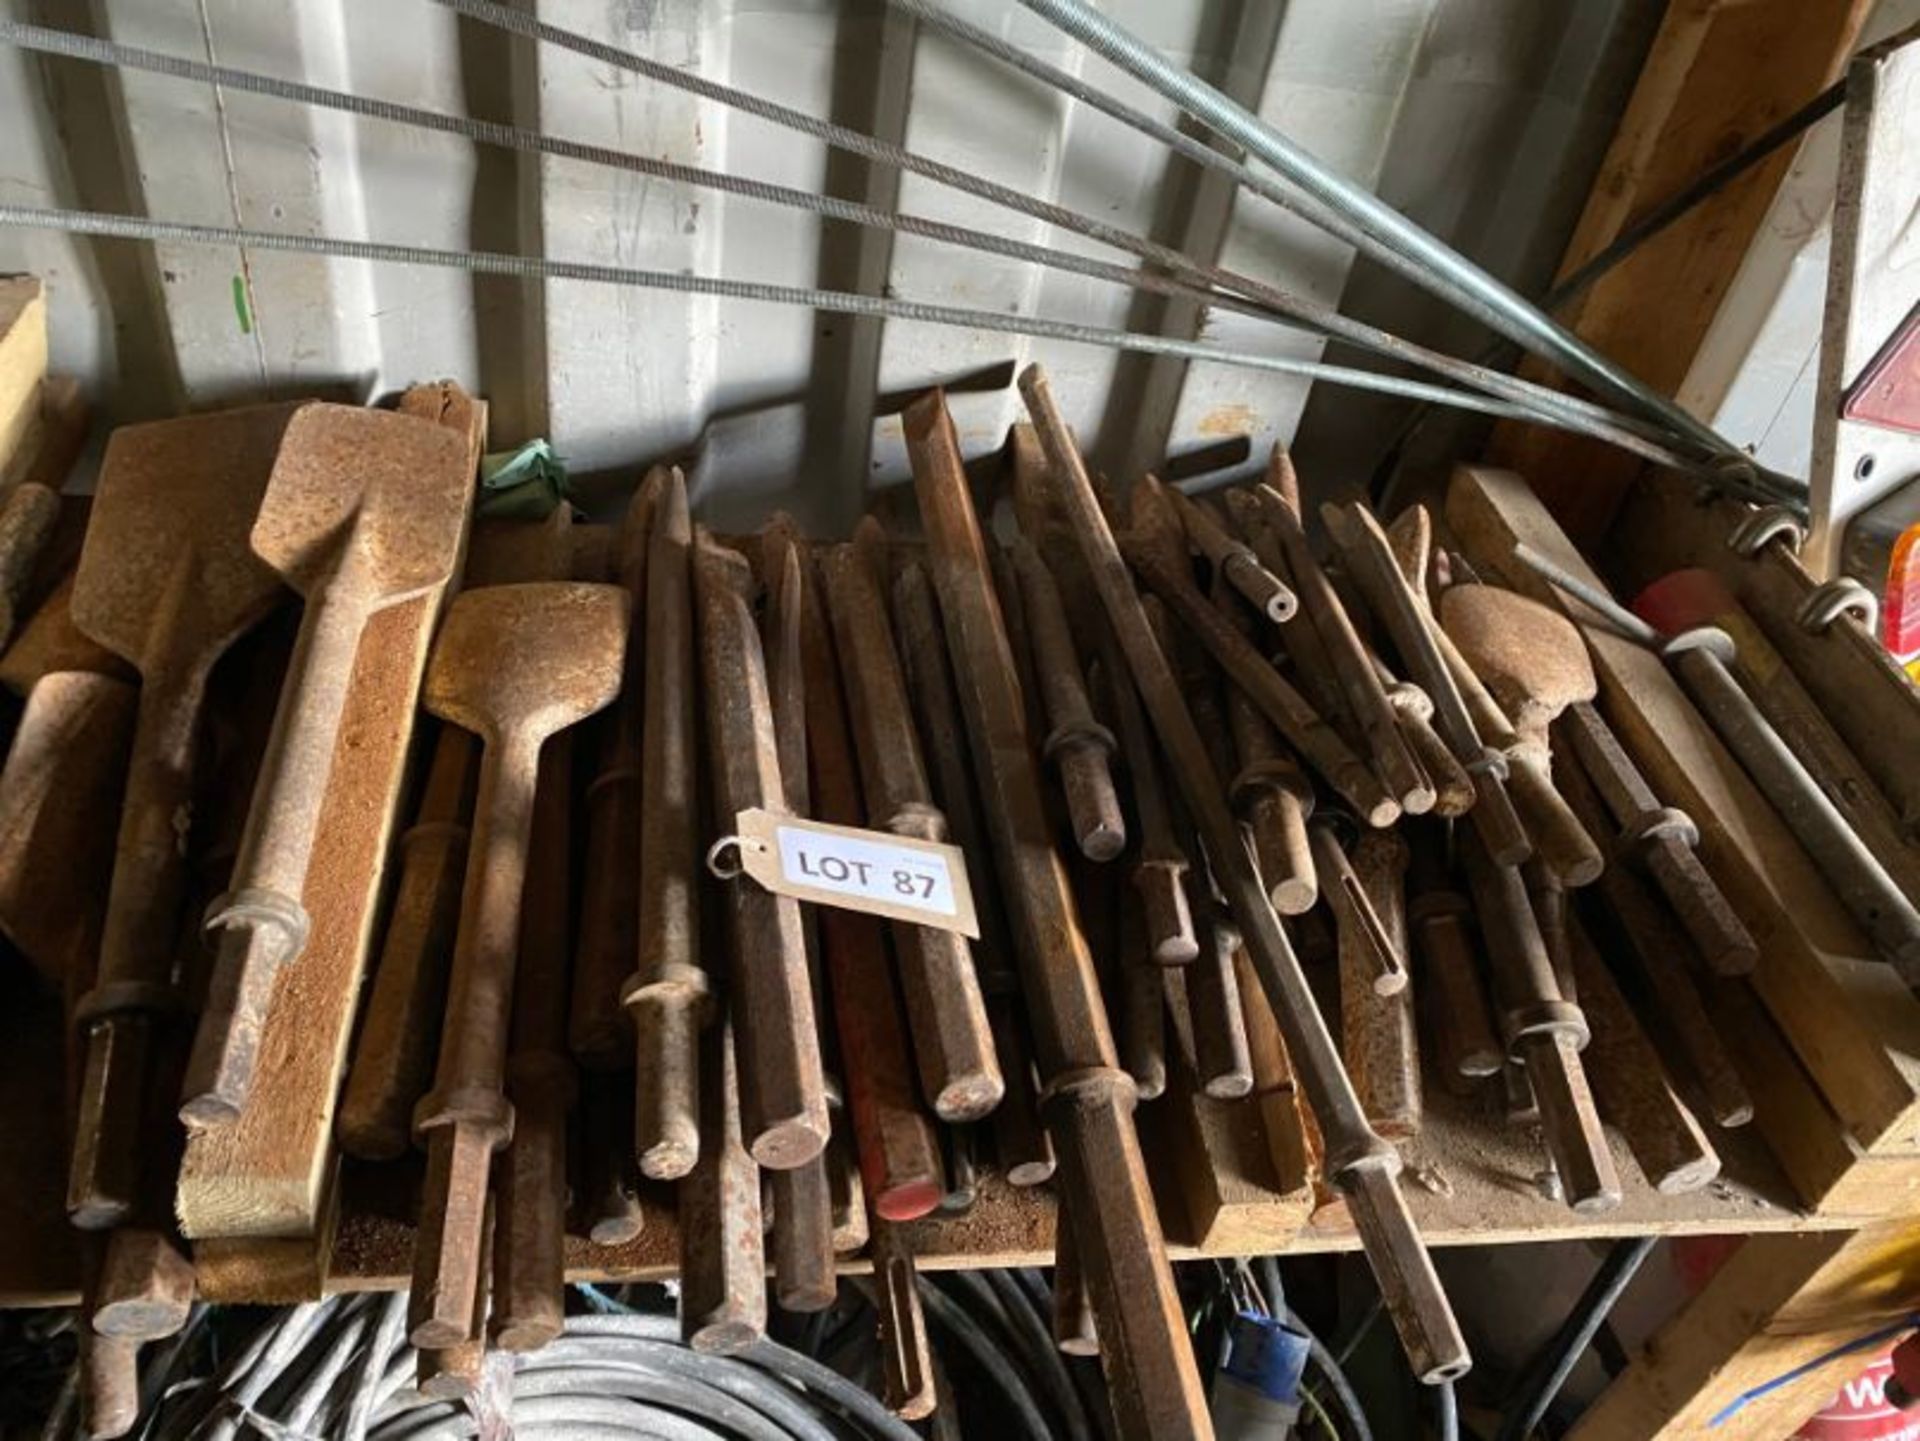 Contents of shelf comprising various steel bits, as lotted